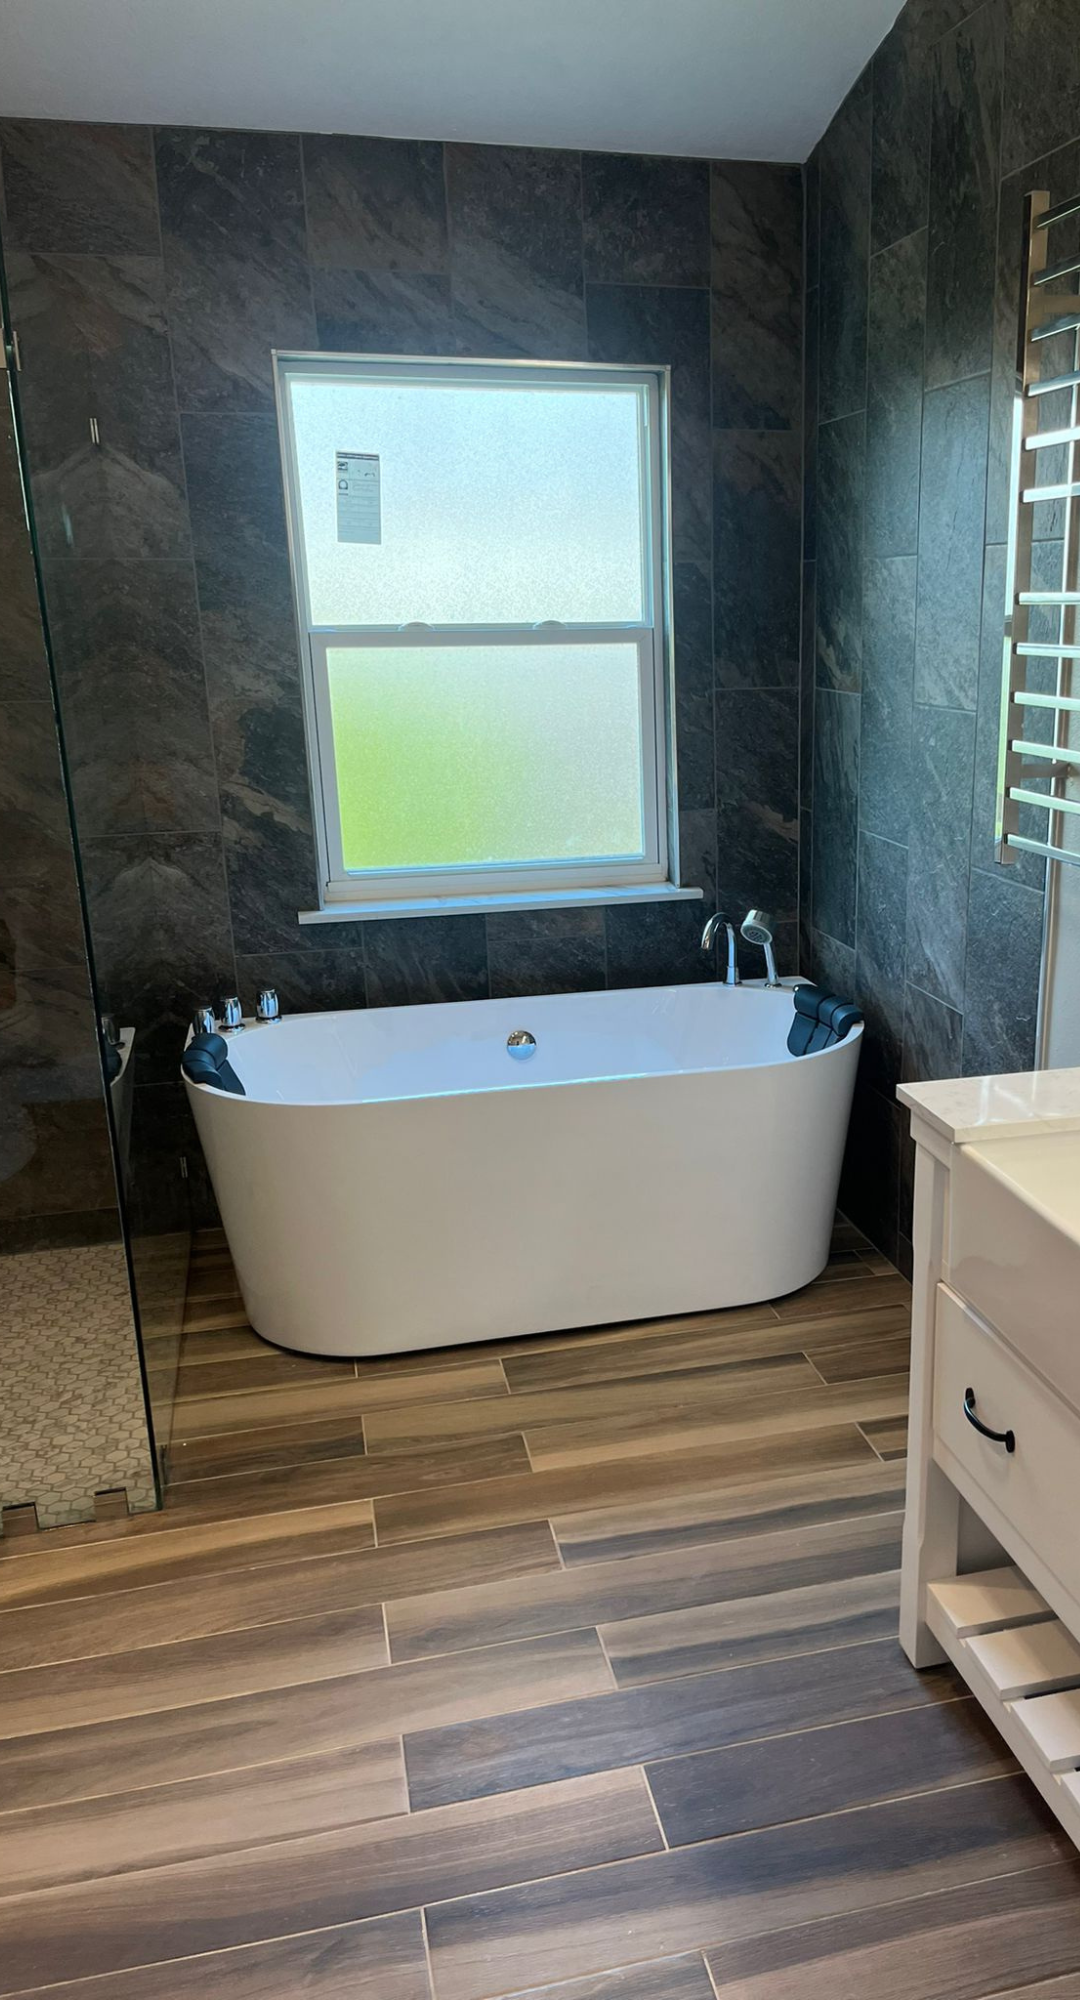 An amazing bathroom that our company renovated!